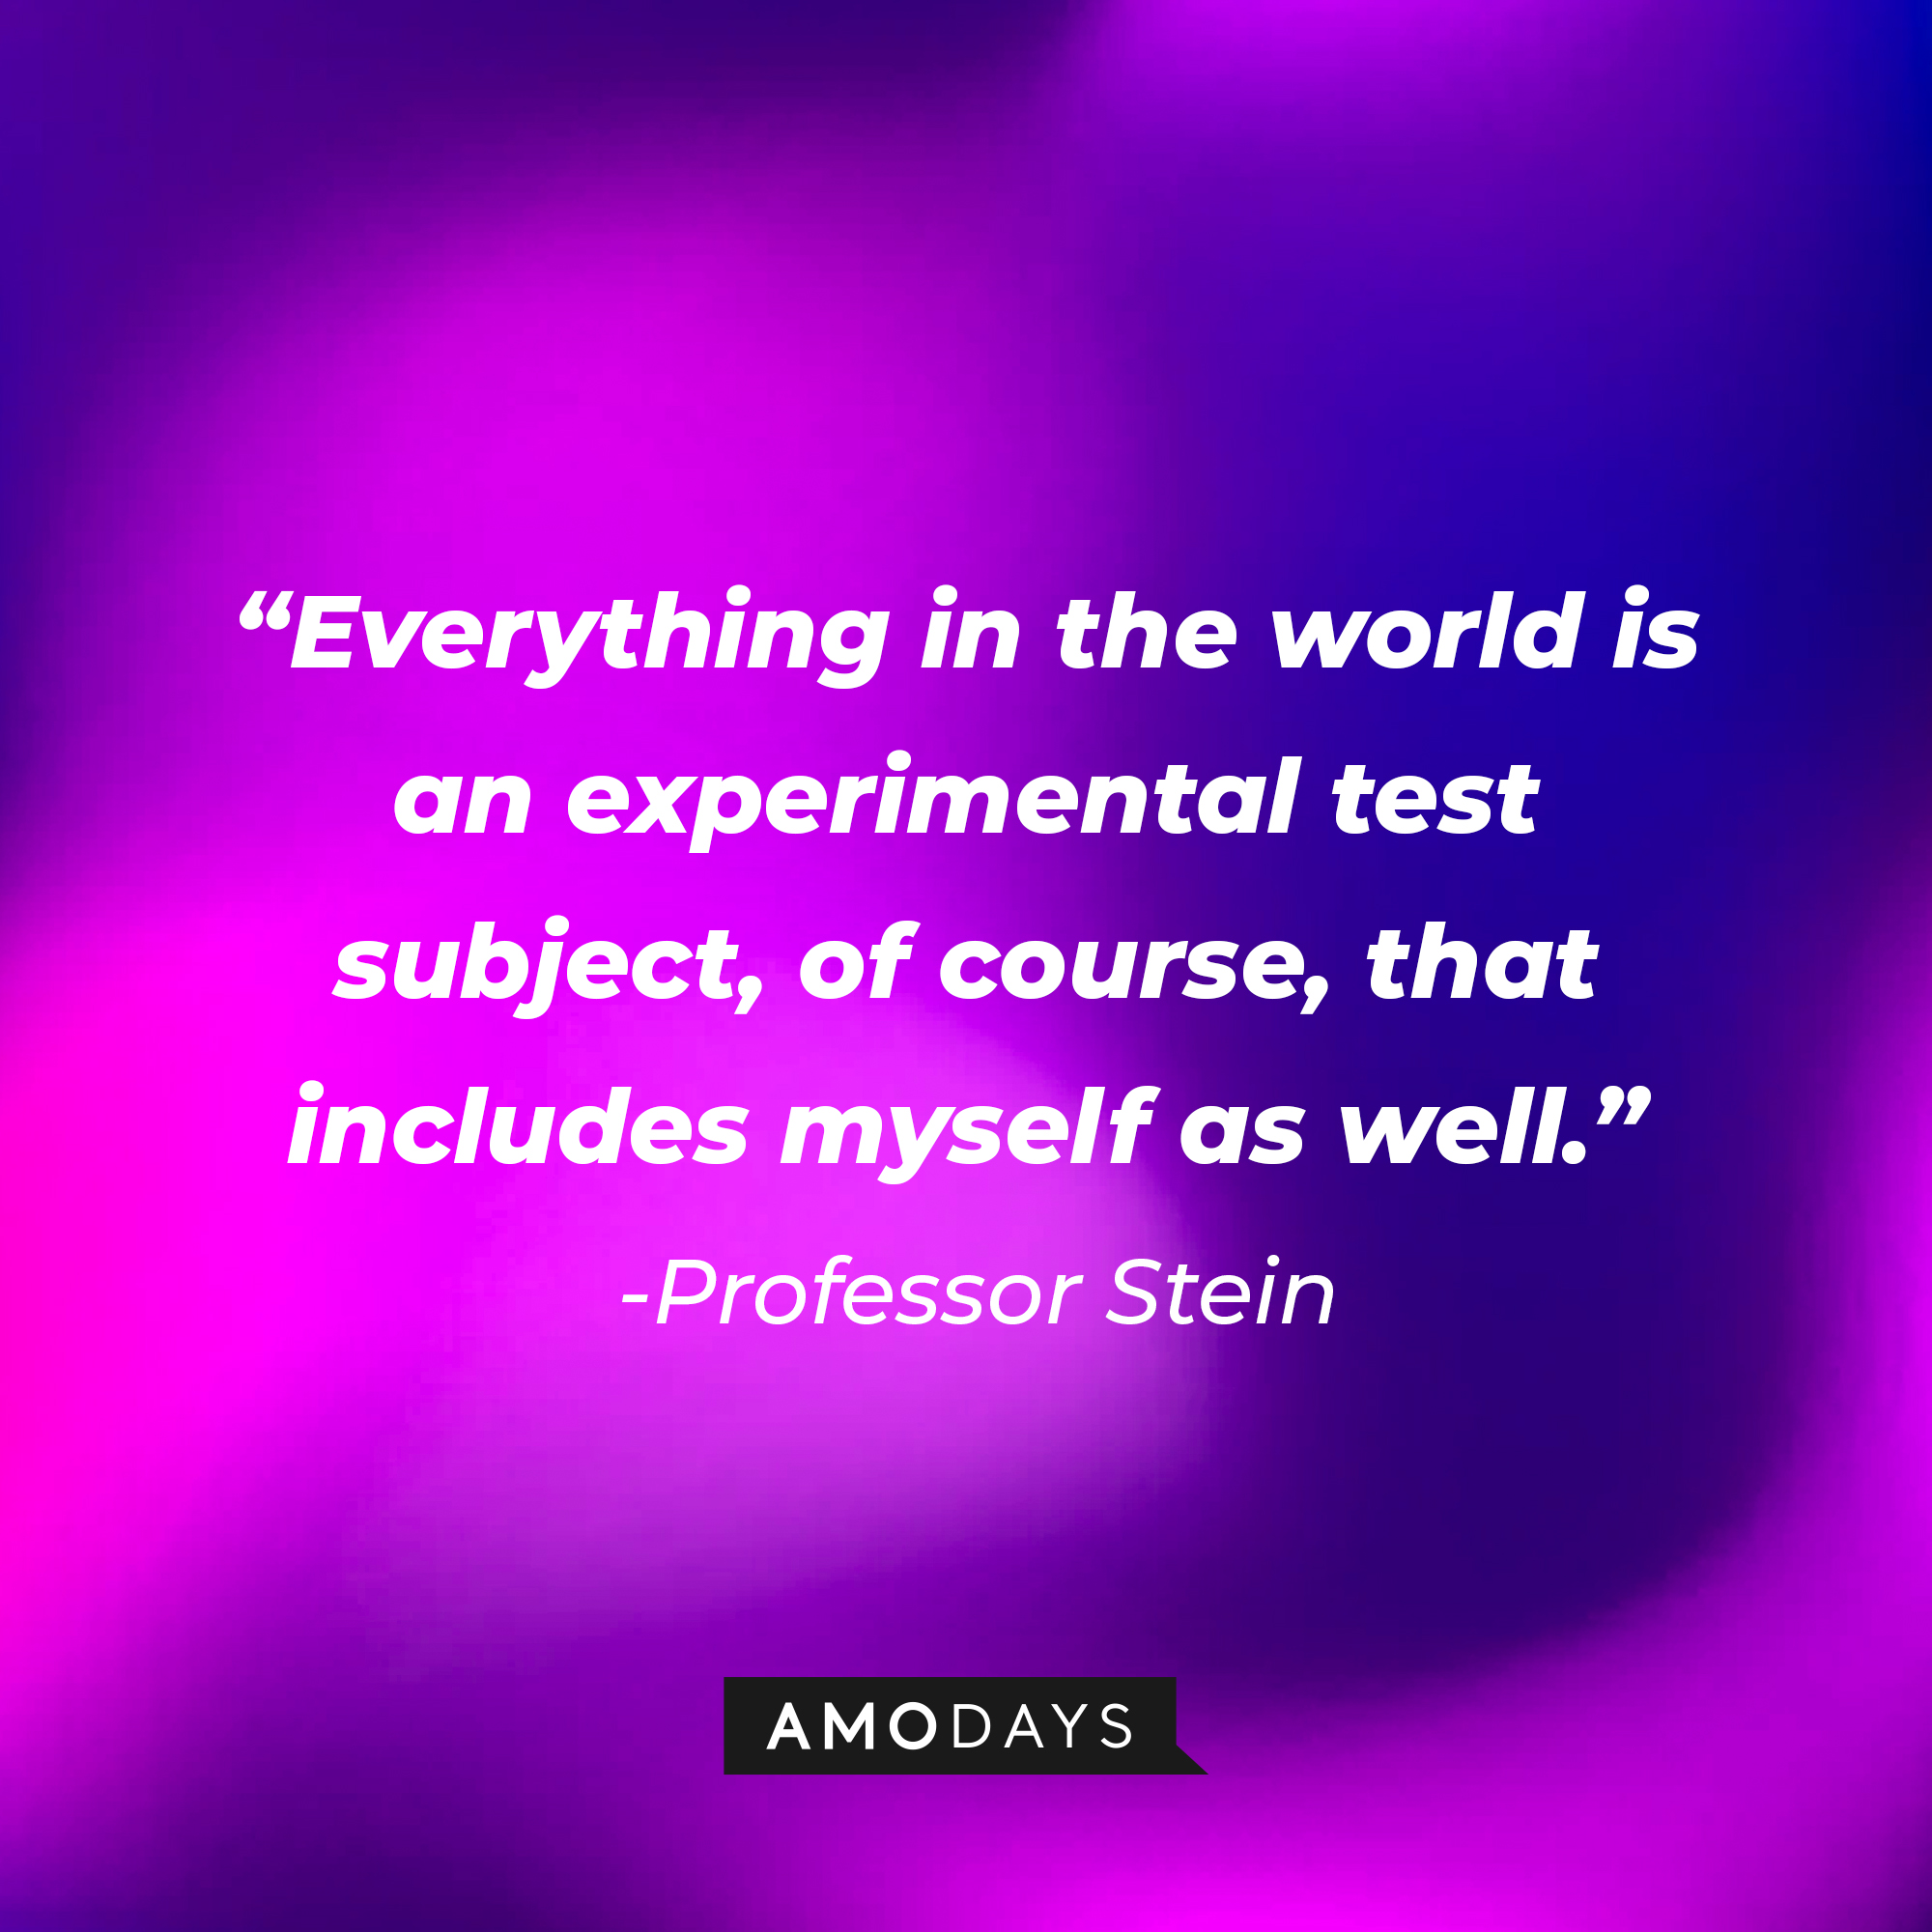 Professor Stein’s quote: "Everything in the world is an experimental test subject, of course, that includes myself as well." | Image: AmoDays